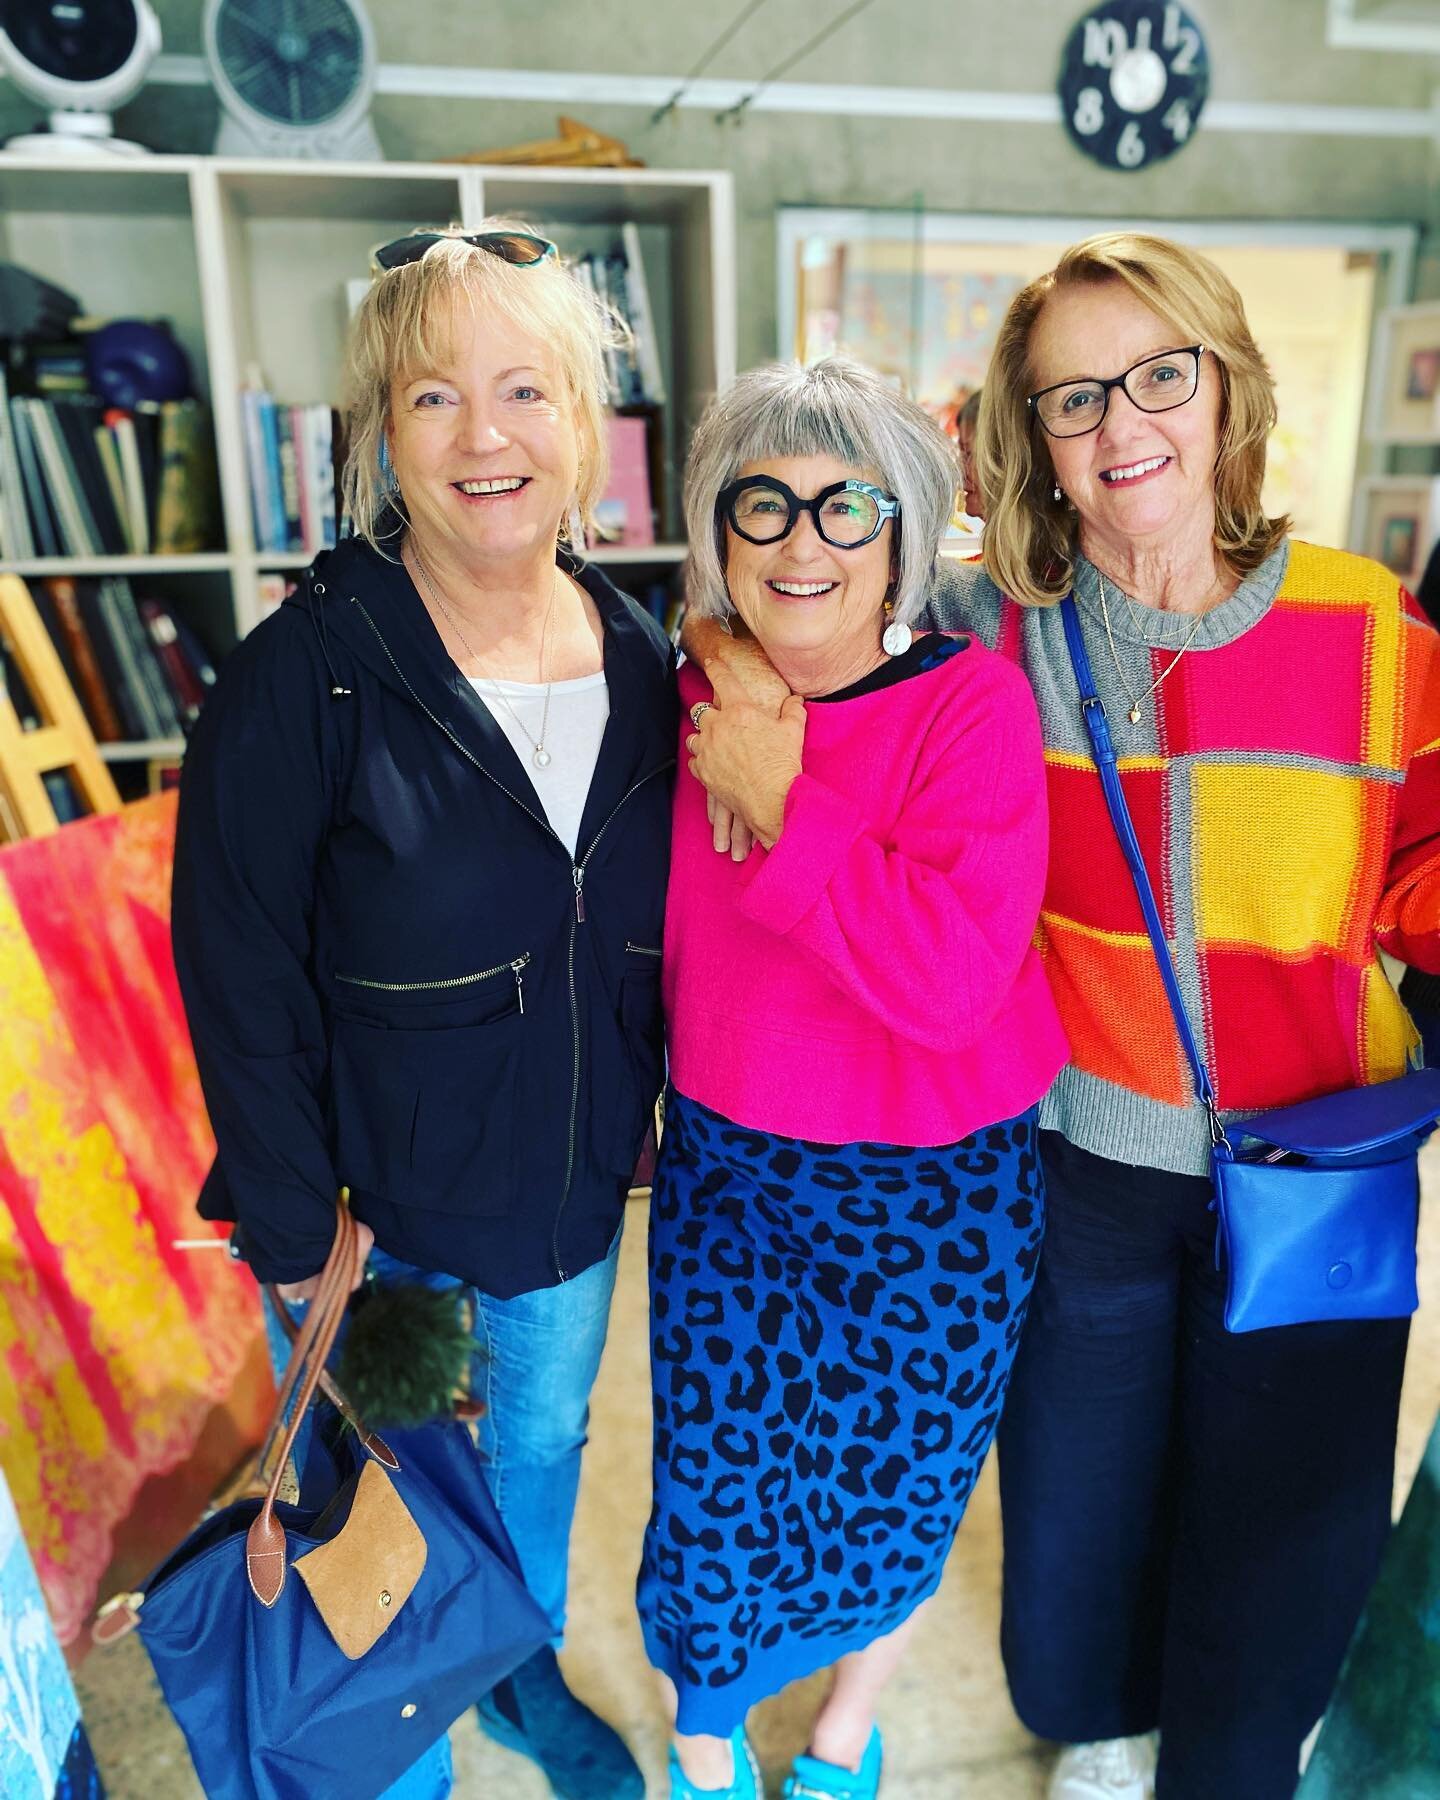 Visit to @jennidohertystudio with these gals. Such a beautiful studio in the Valley and such a privilege to be welcomed so warmly. 

Cake and coffee by @yabberup_studio was pretty good and managed a couple more of purchases to support our artists😀

